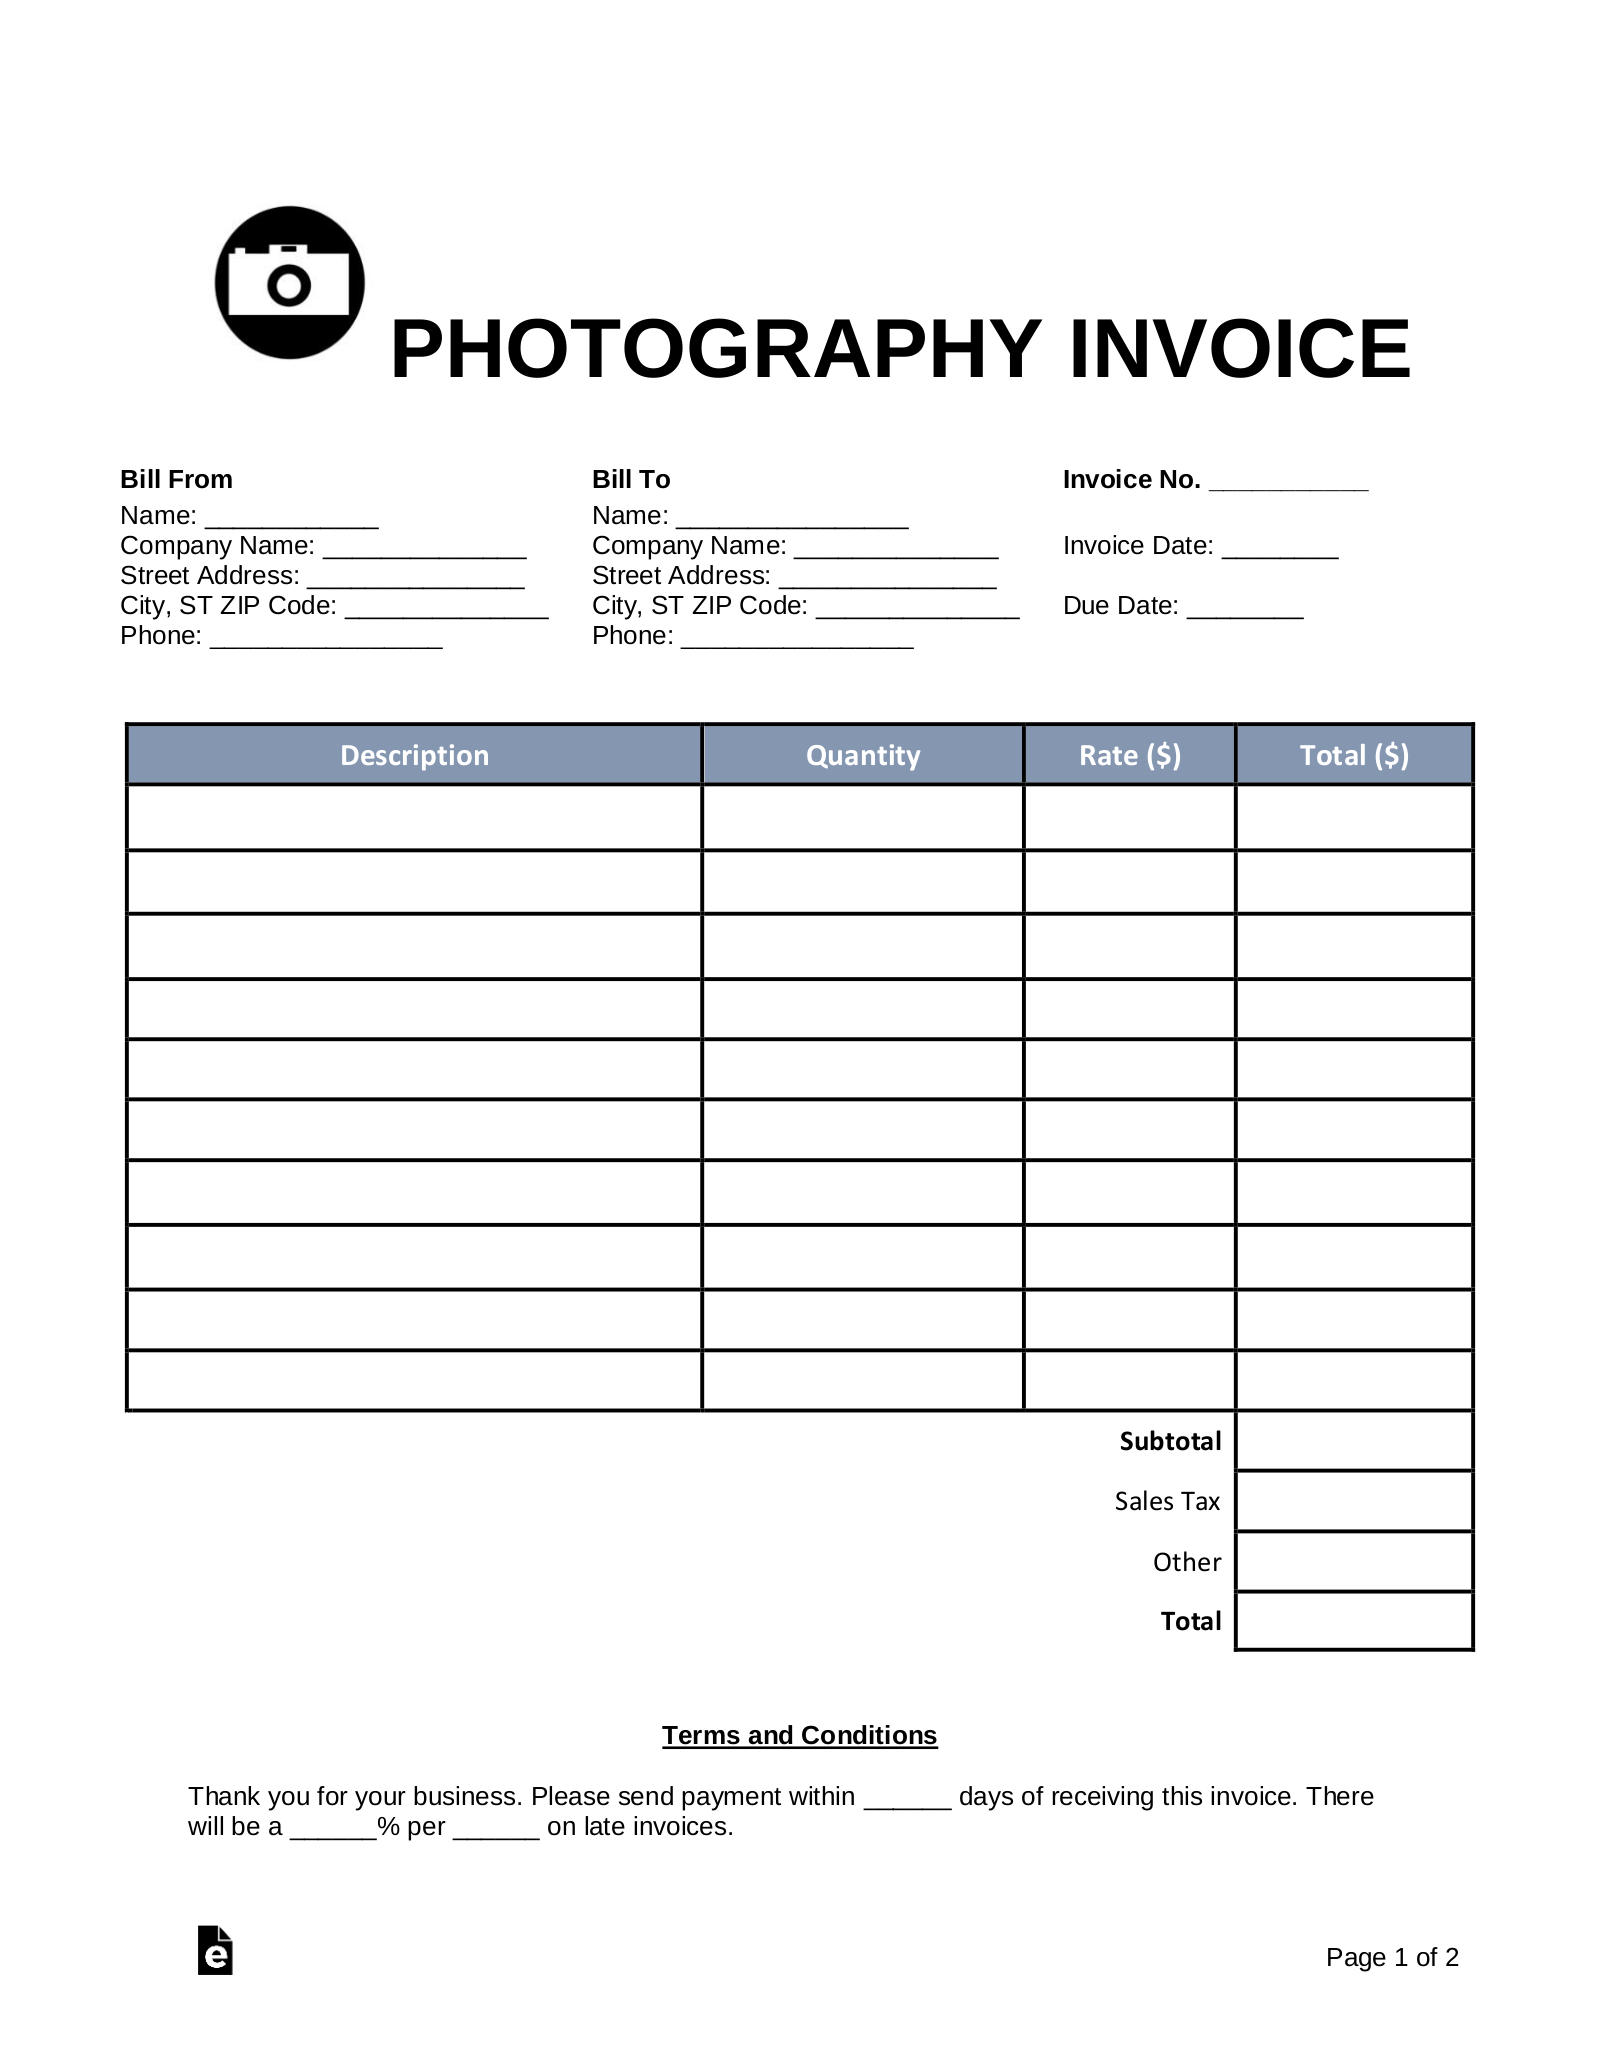 Free Photography Invoice Template - Word | PDF – eForms